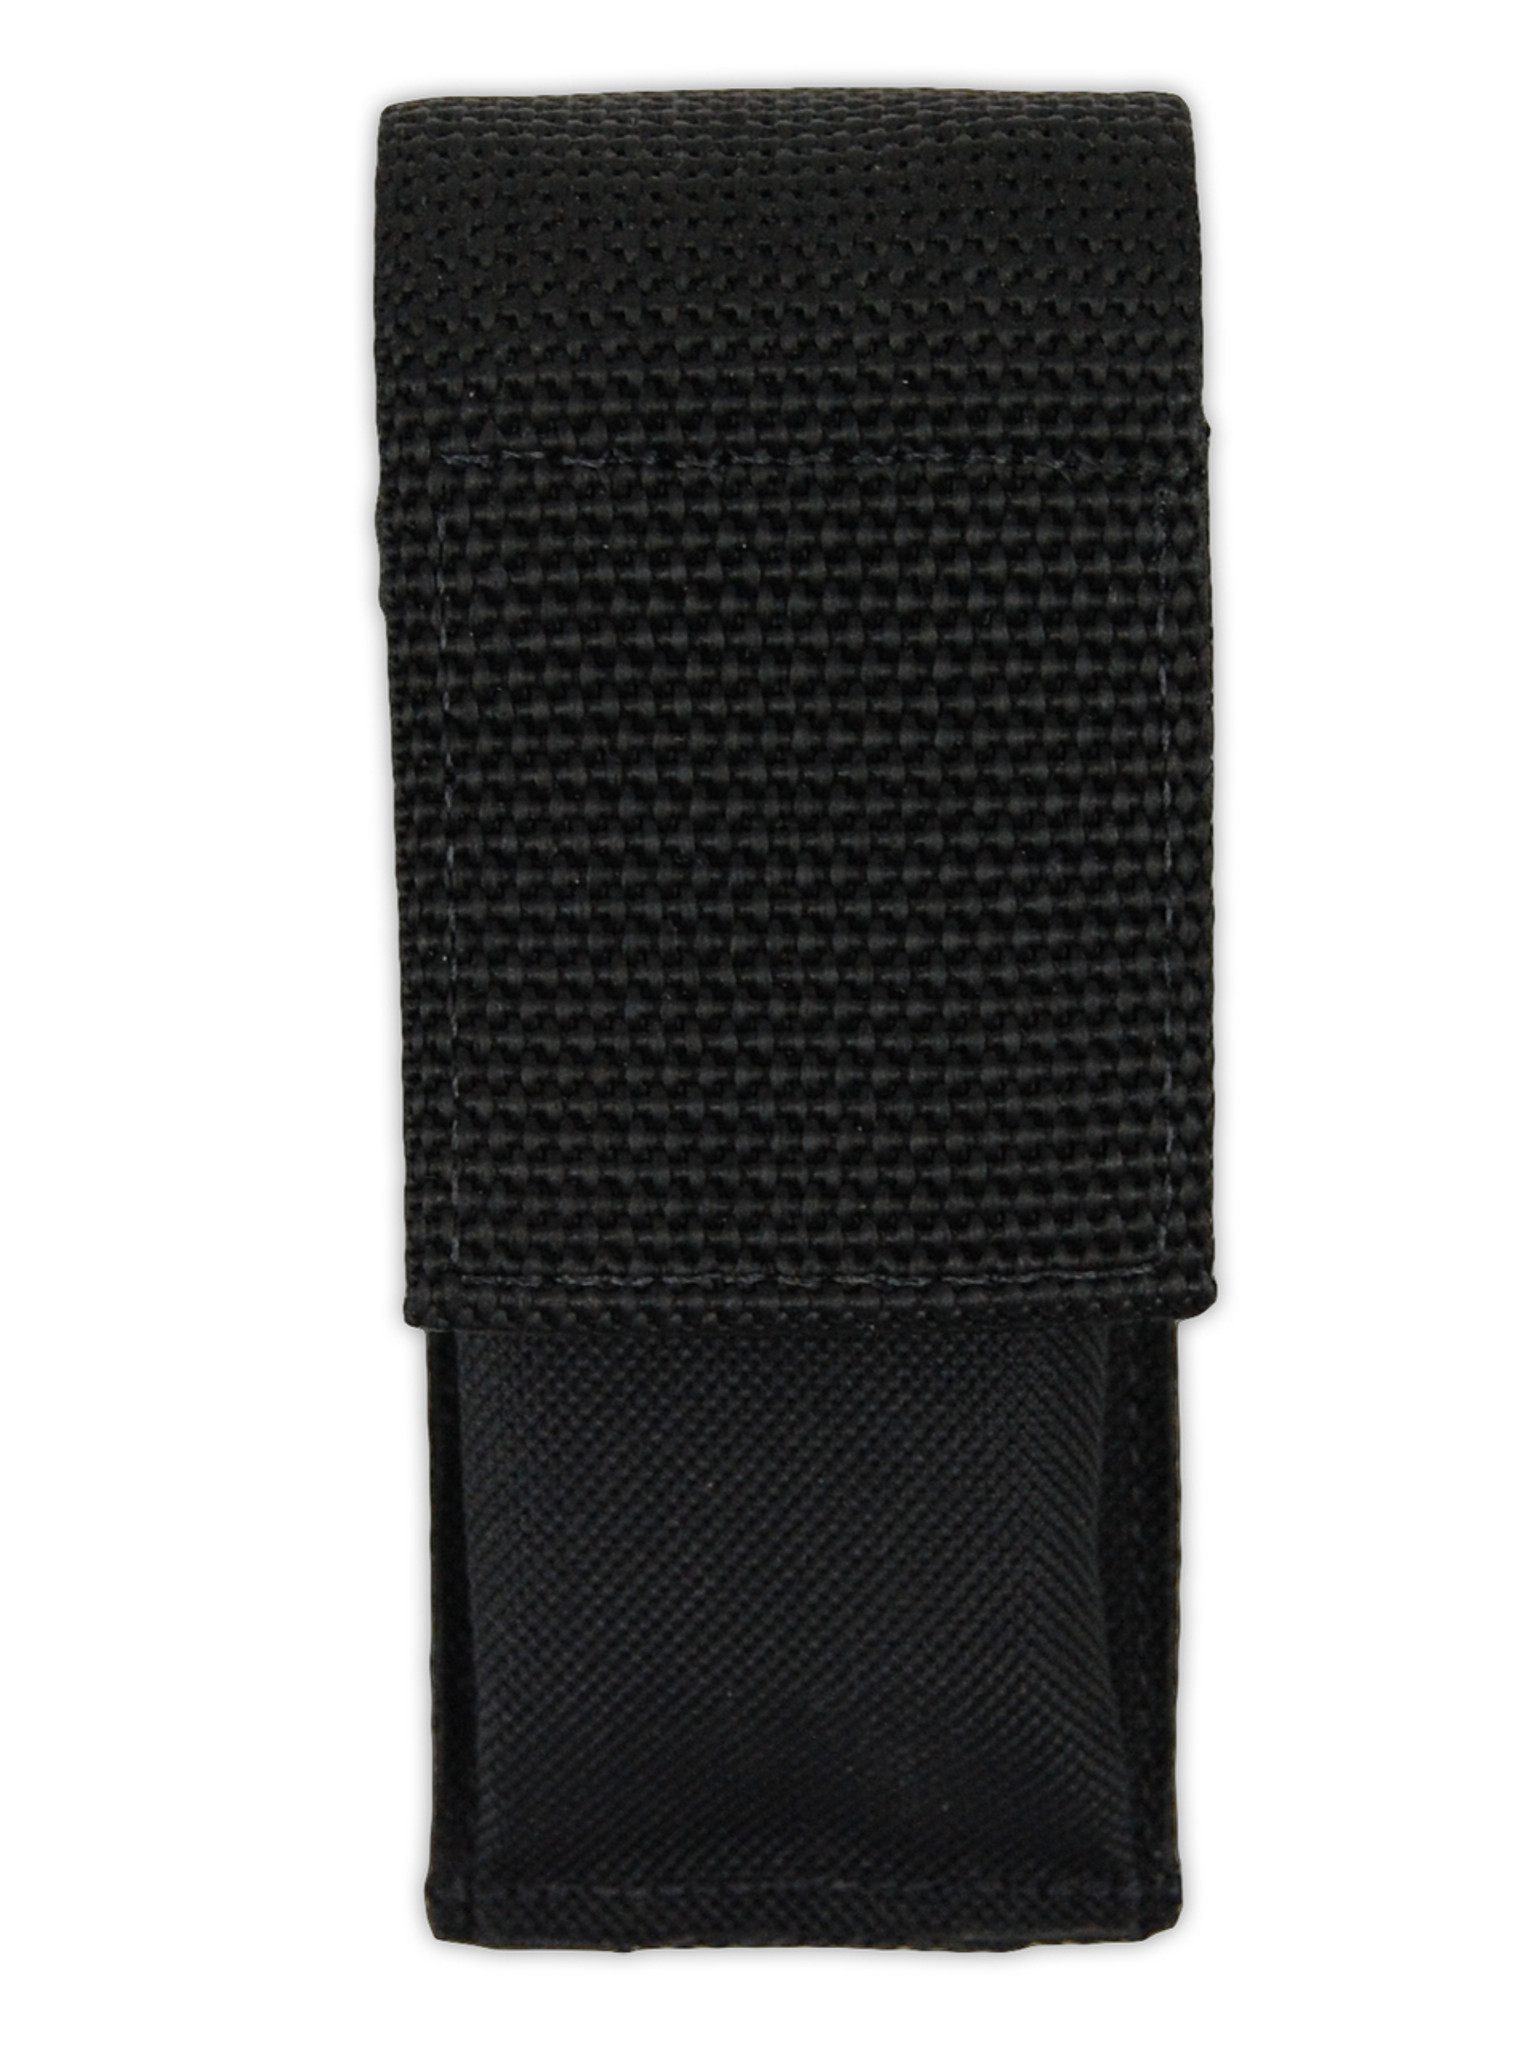 NEW Barsony Black Leather Single Mag Pouch for Sig-Sauer Walther Mini 22 25 380 